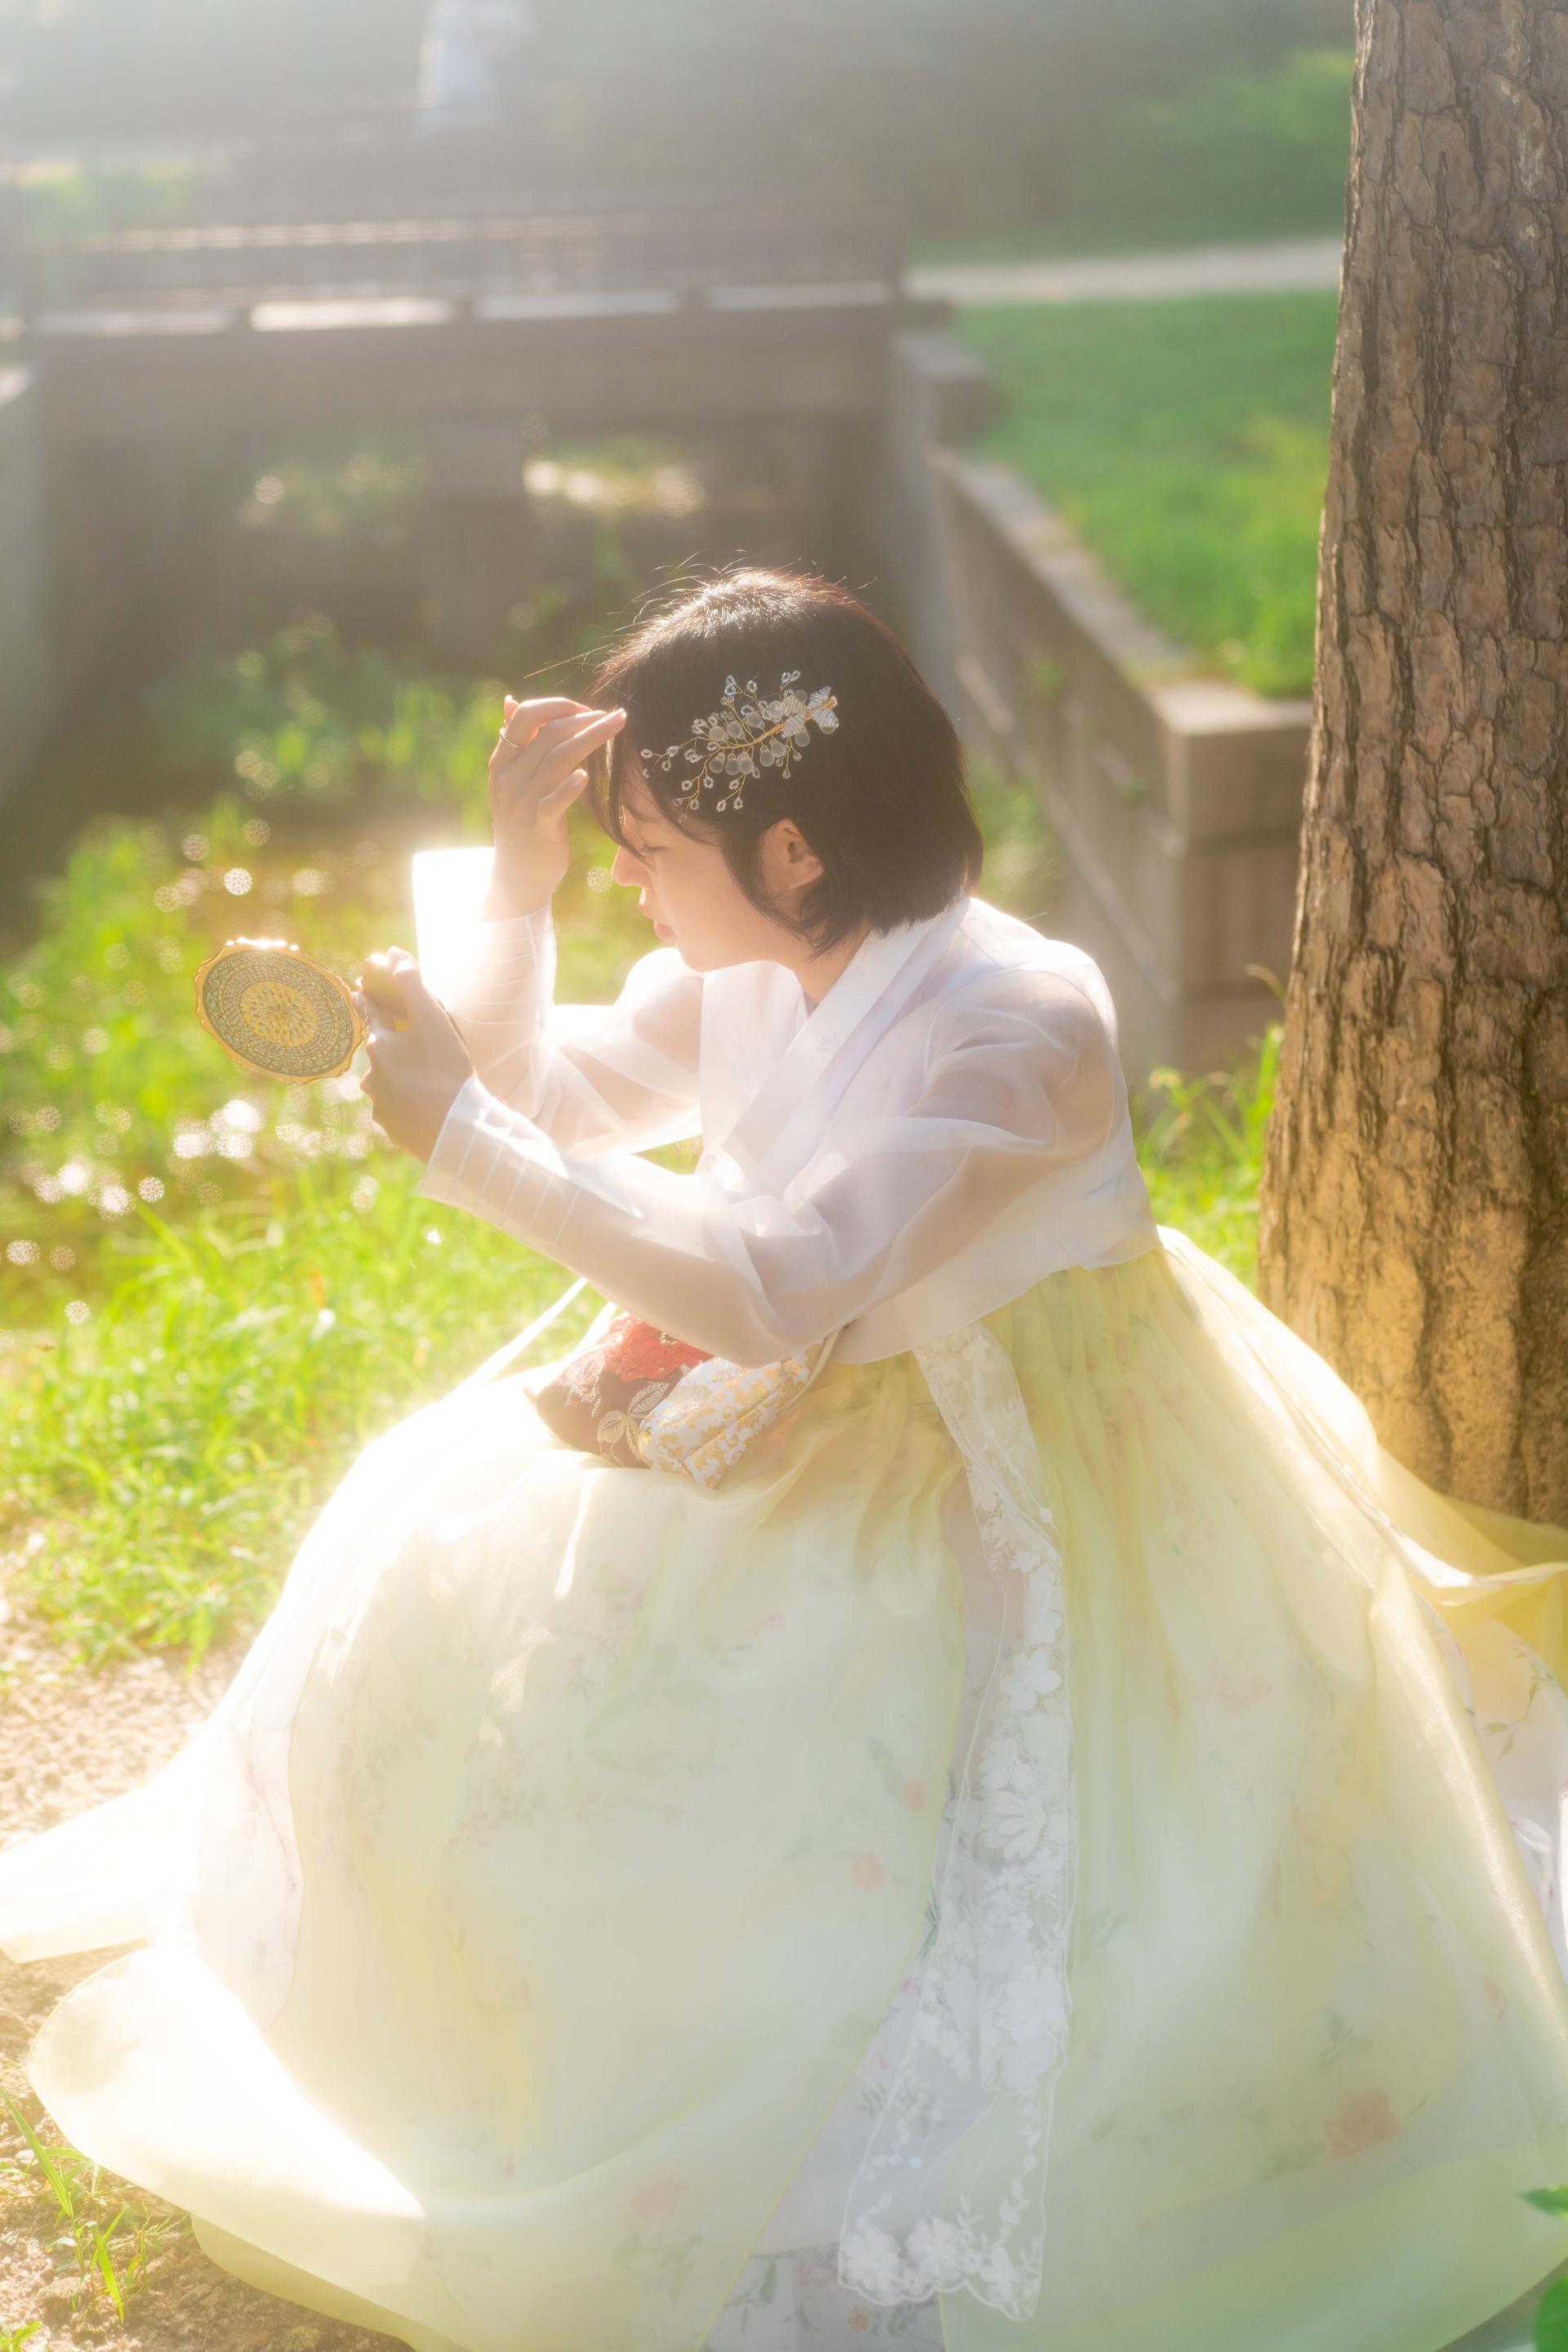 Happy people enjoy leisure time in nature, wearing hanbok and dresses, while surrounded by greenery and sunlight.